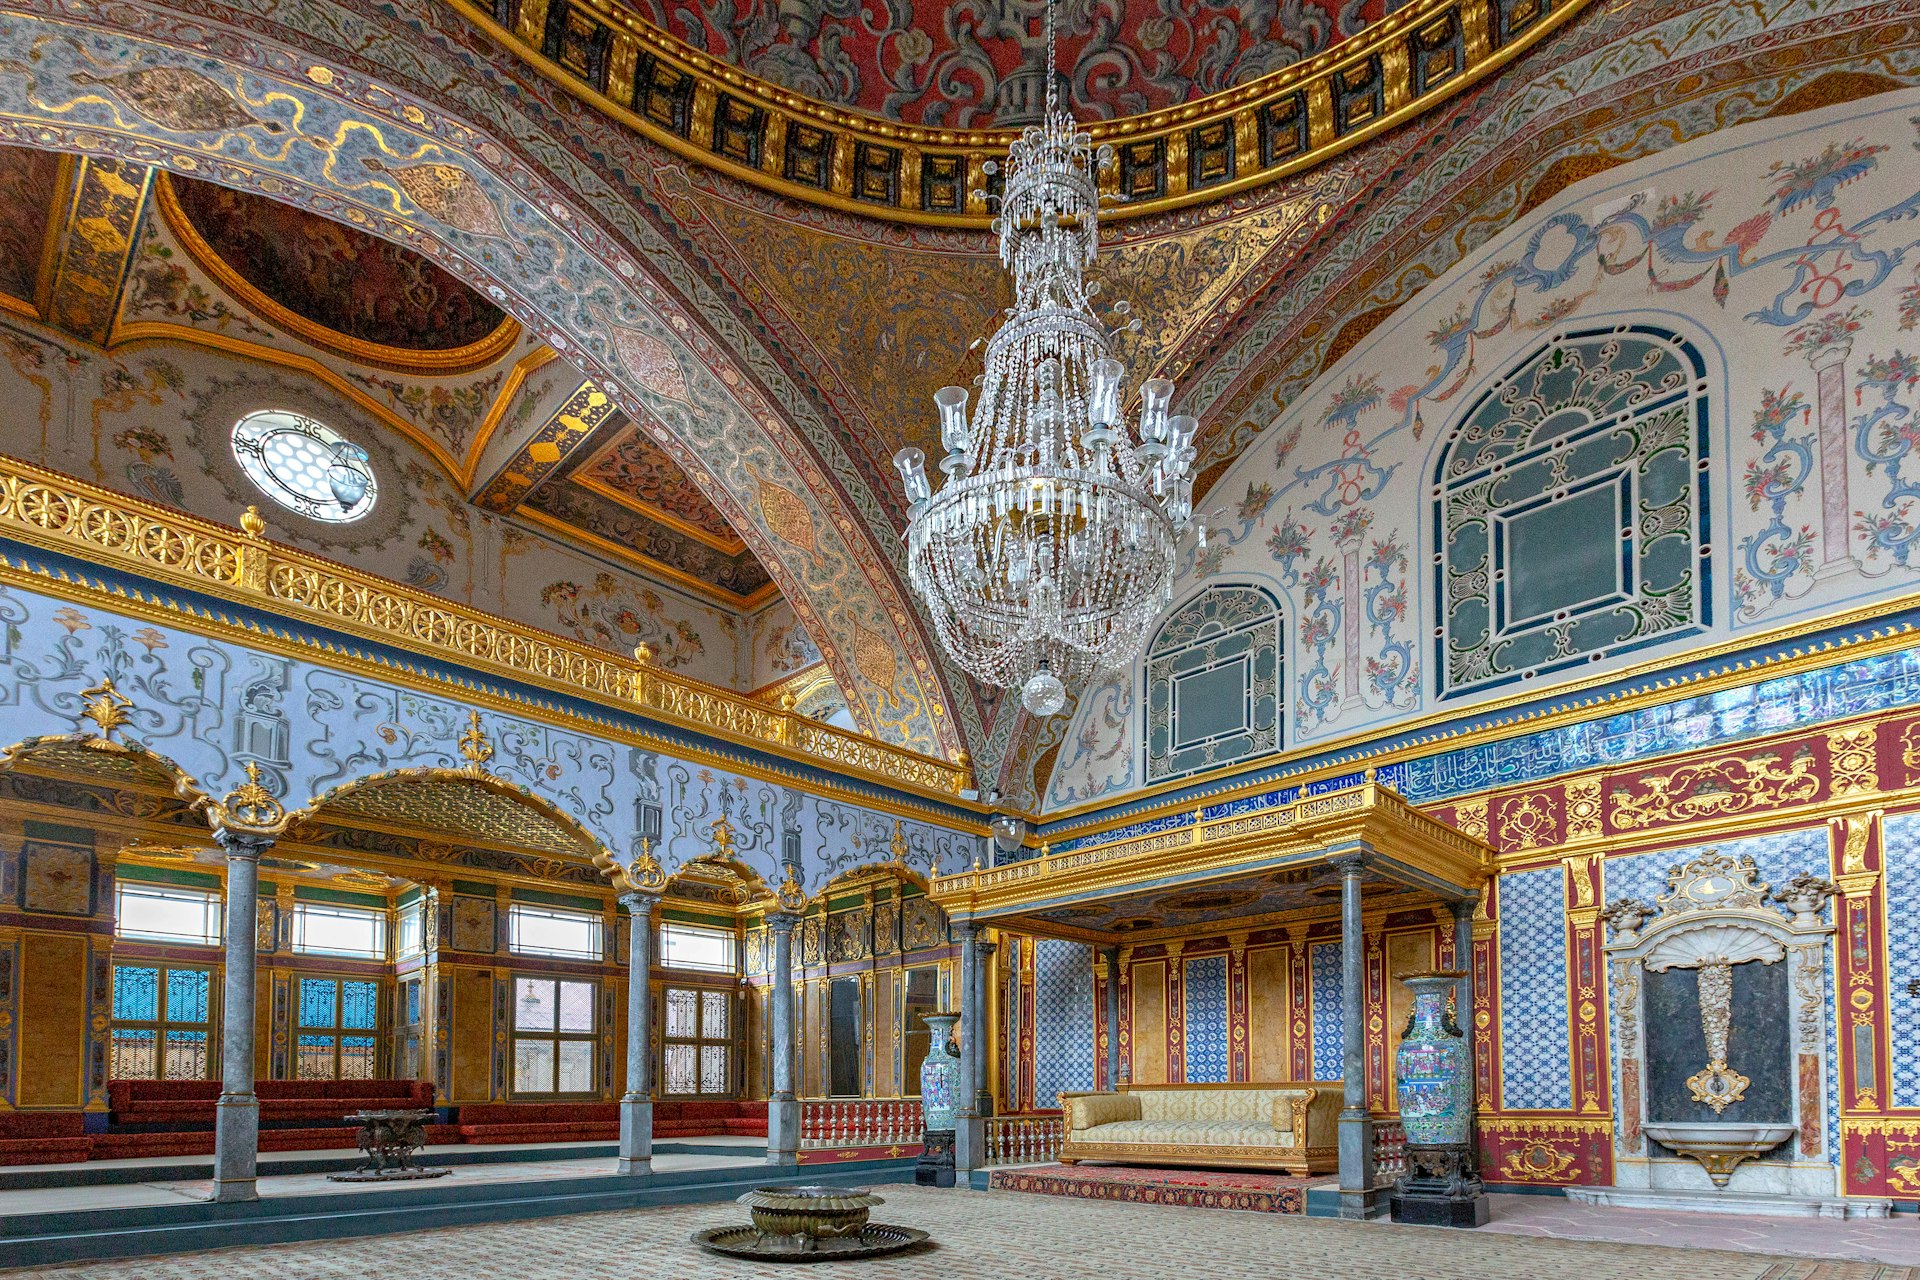 An ornate area of Topkapi Palace in Istanbul